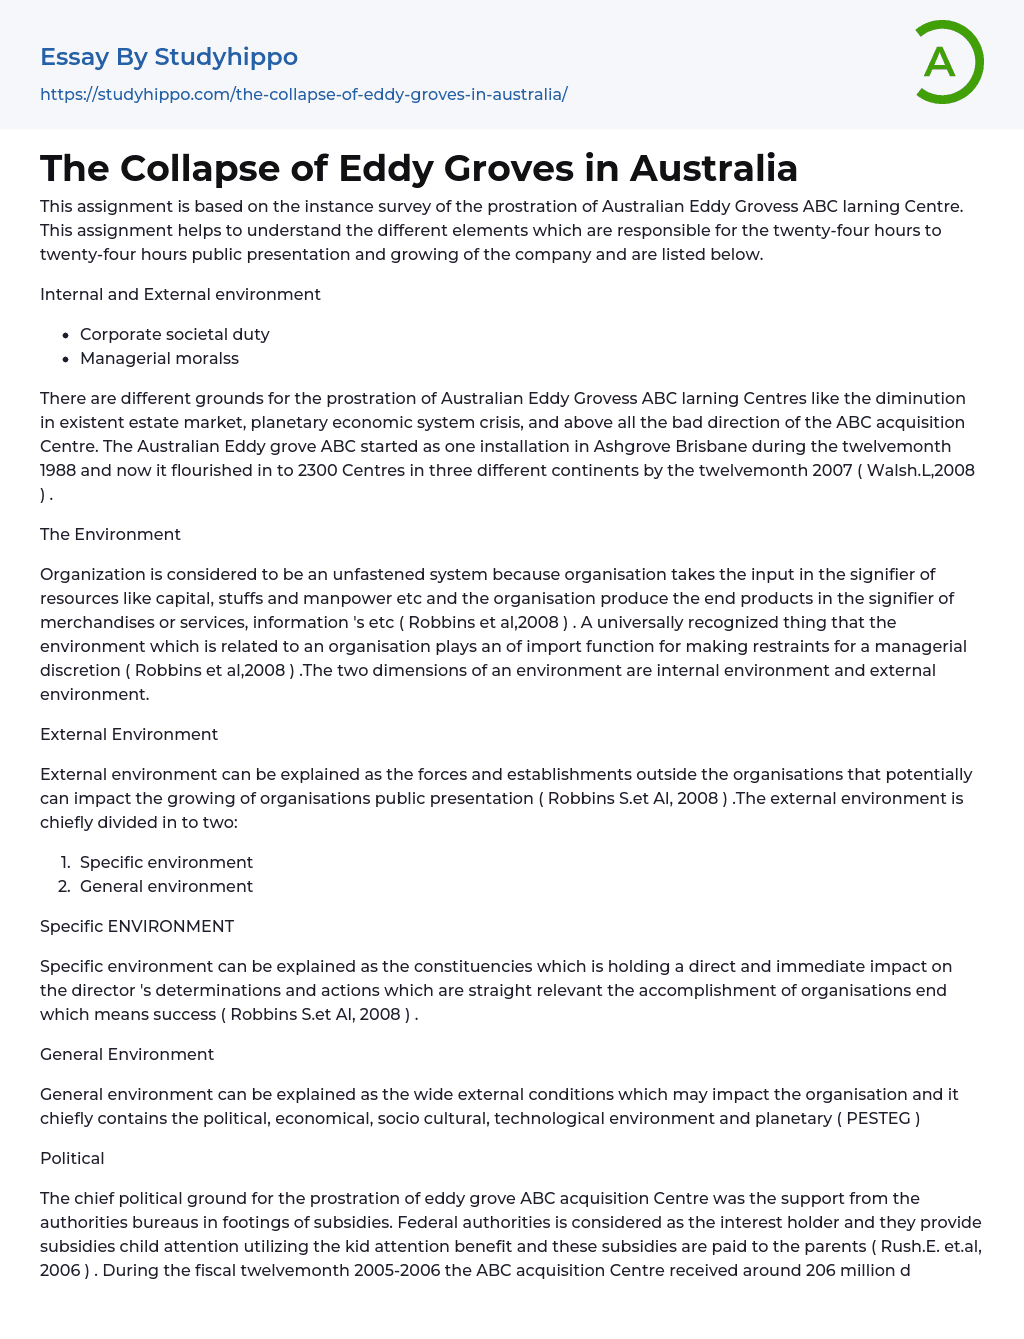 The Collapse of Eddy Groves in Australia Essay Example